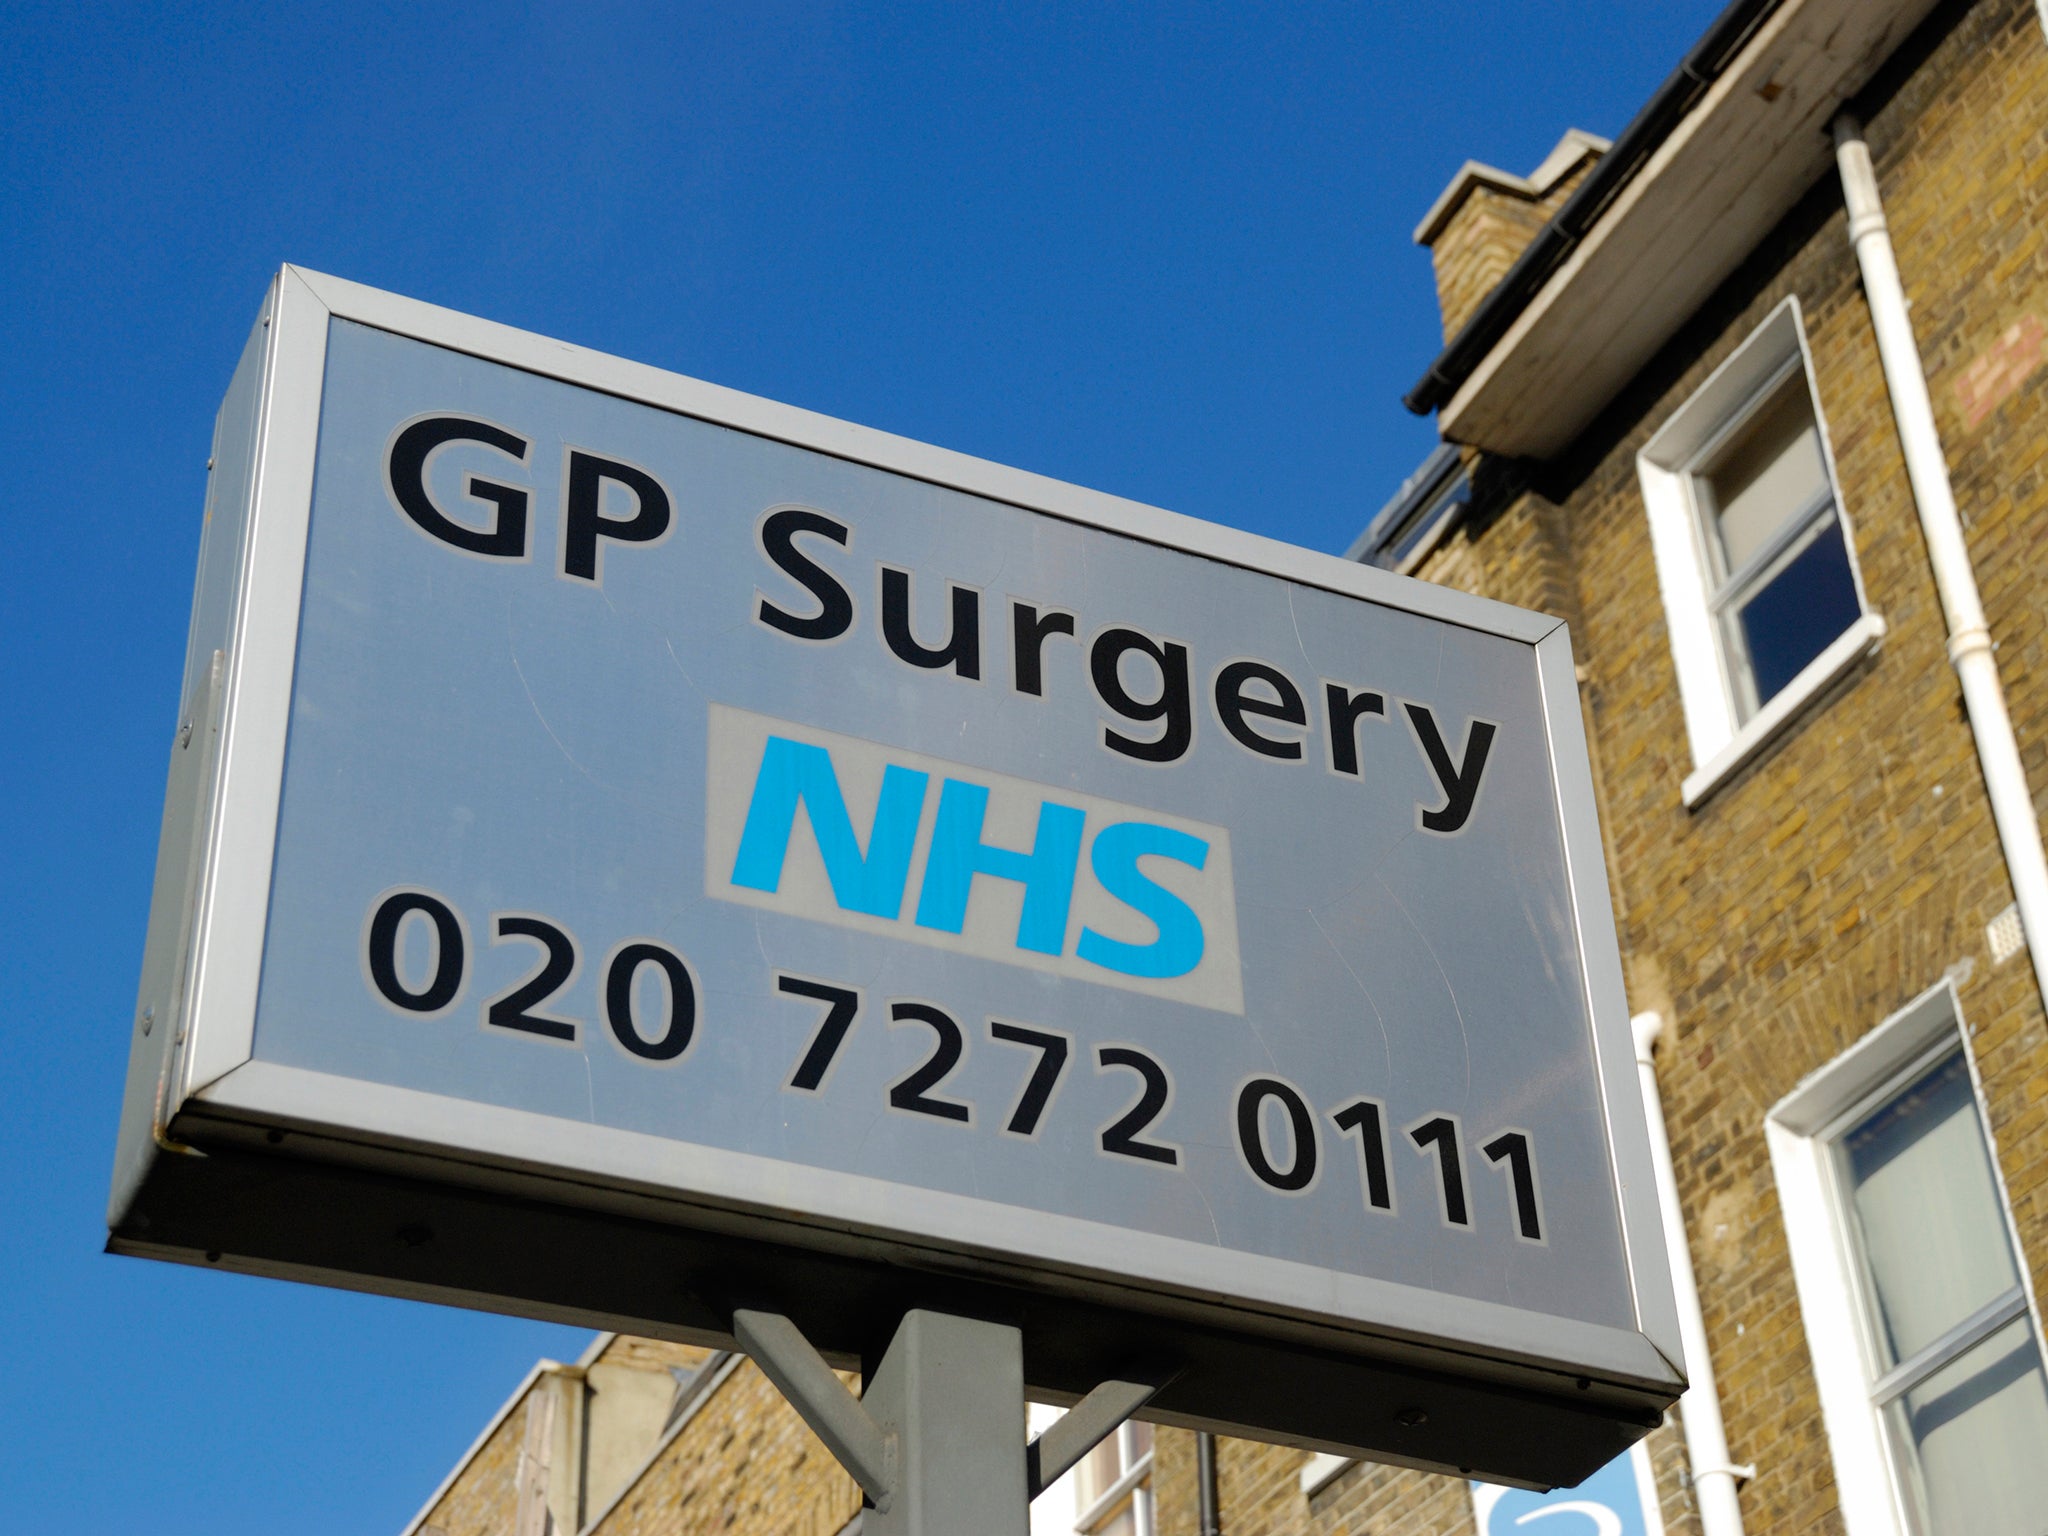 As part of plans to recruit 5,000 more GPs by 2020, the Government and NHS England will focus efforts on areas that have struggled to recruit new GPs